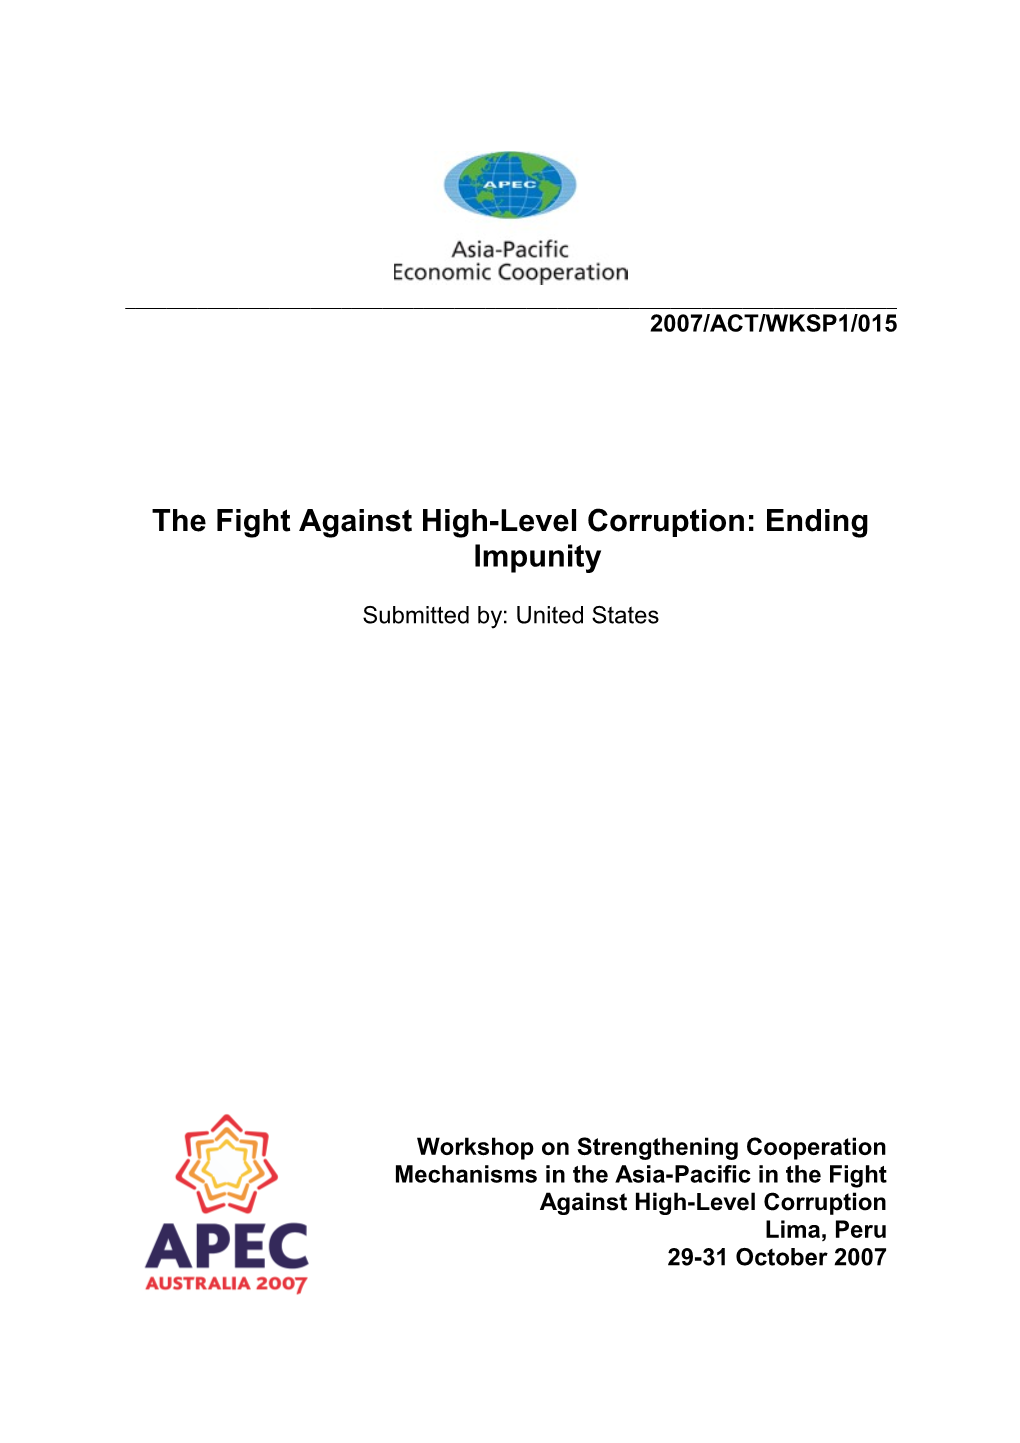 The Fight Against High-Level Corruption: Ending Impunity